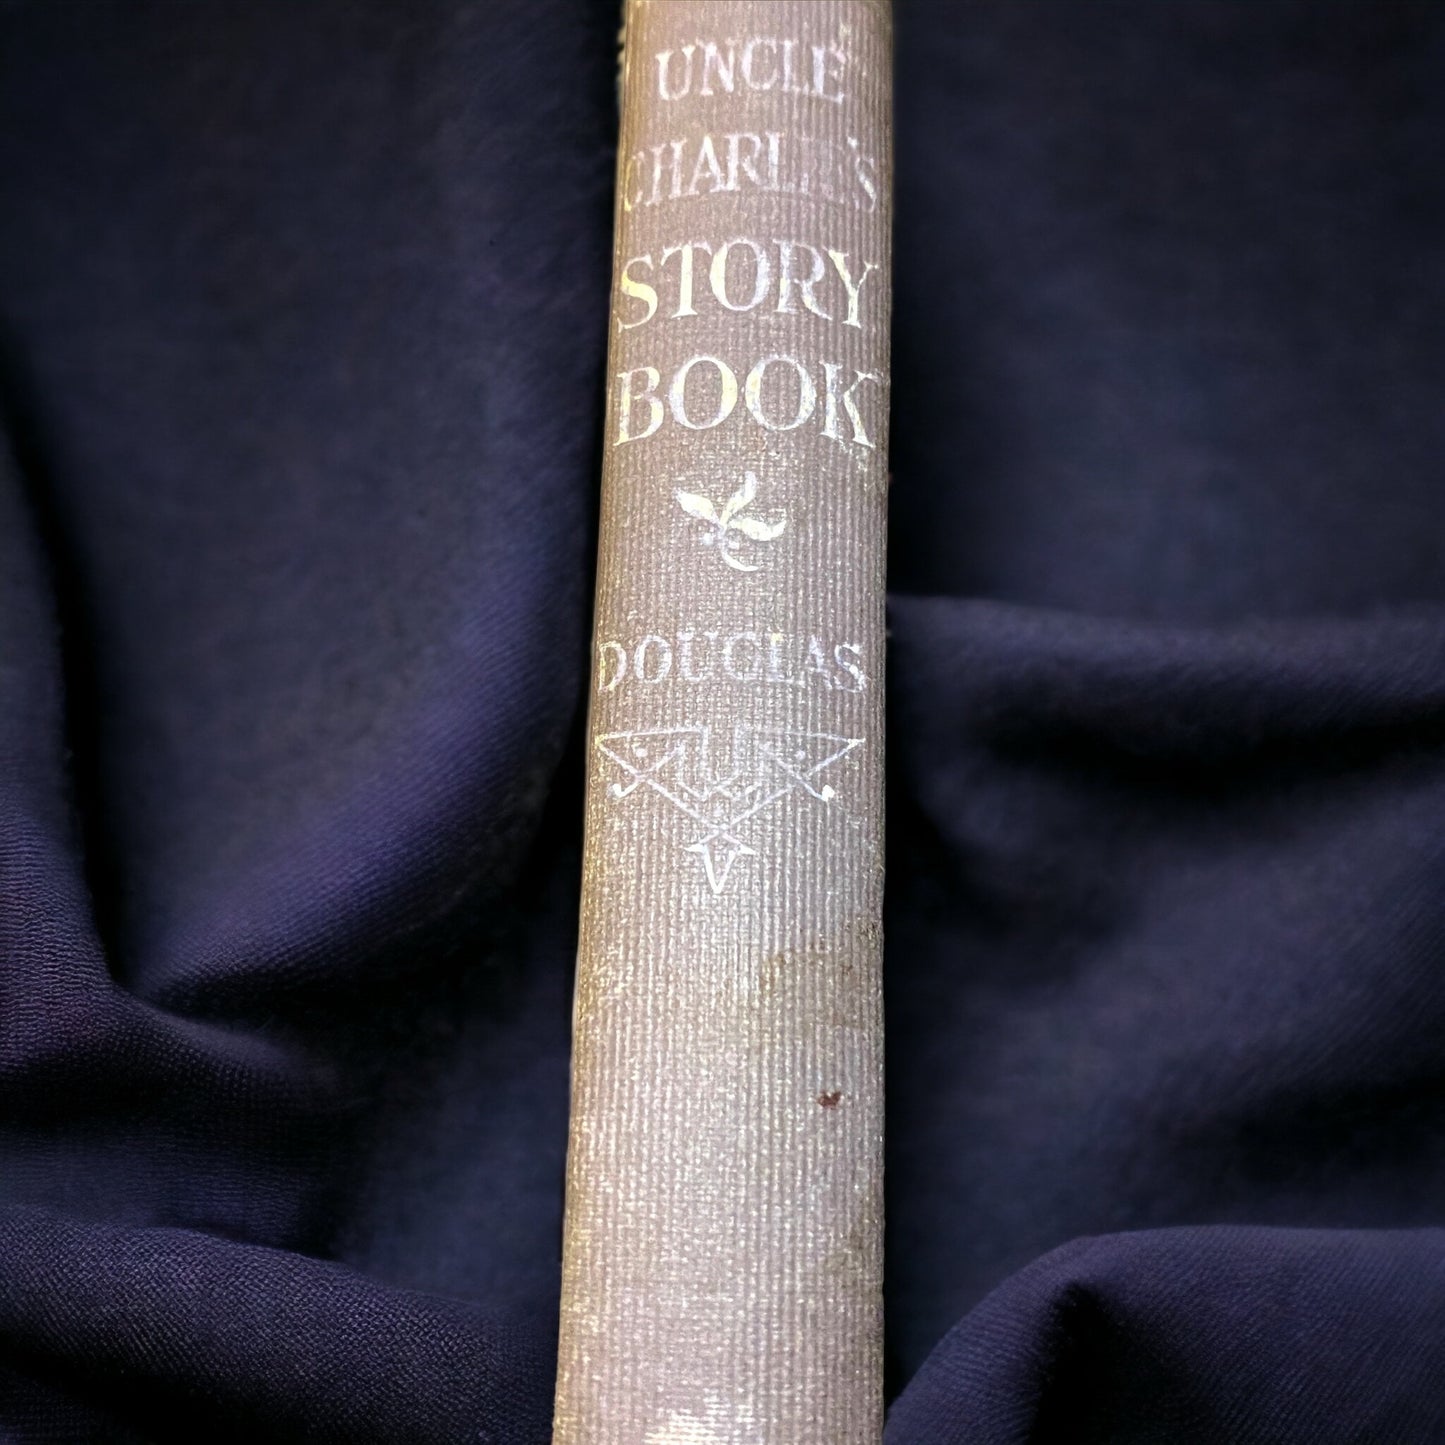 Uncle Charlie’s Story Book By Charles Noel Douglas, Signed By The Author, 1913 (First Edition)